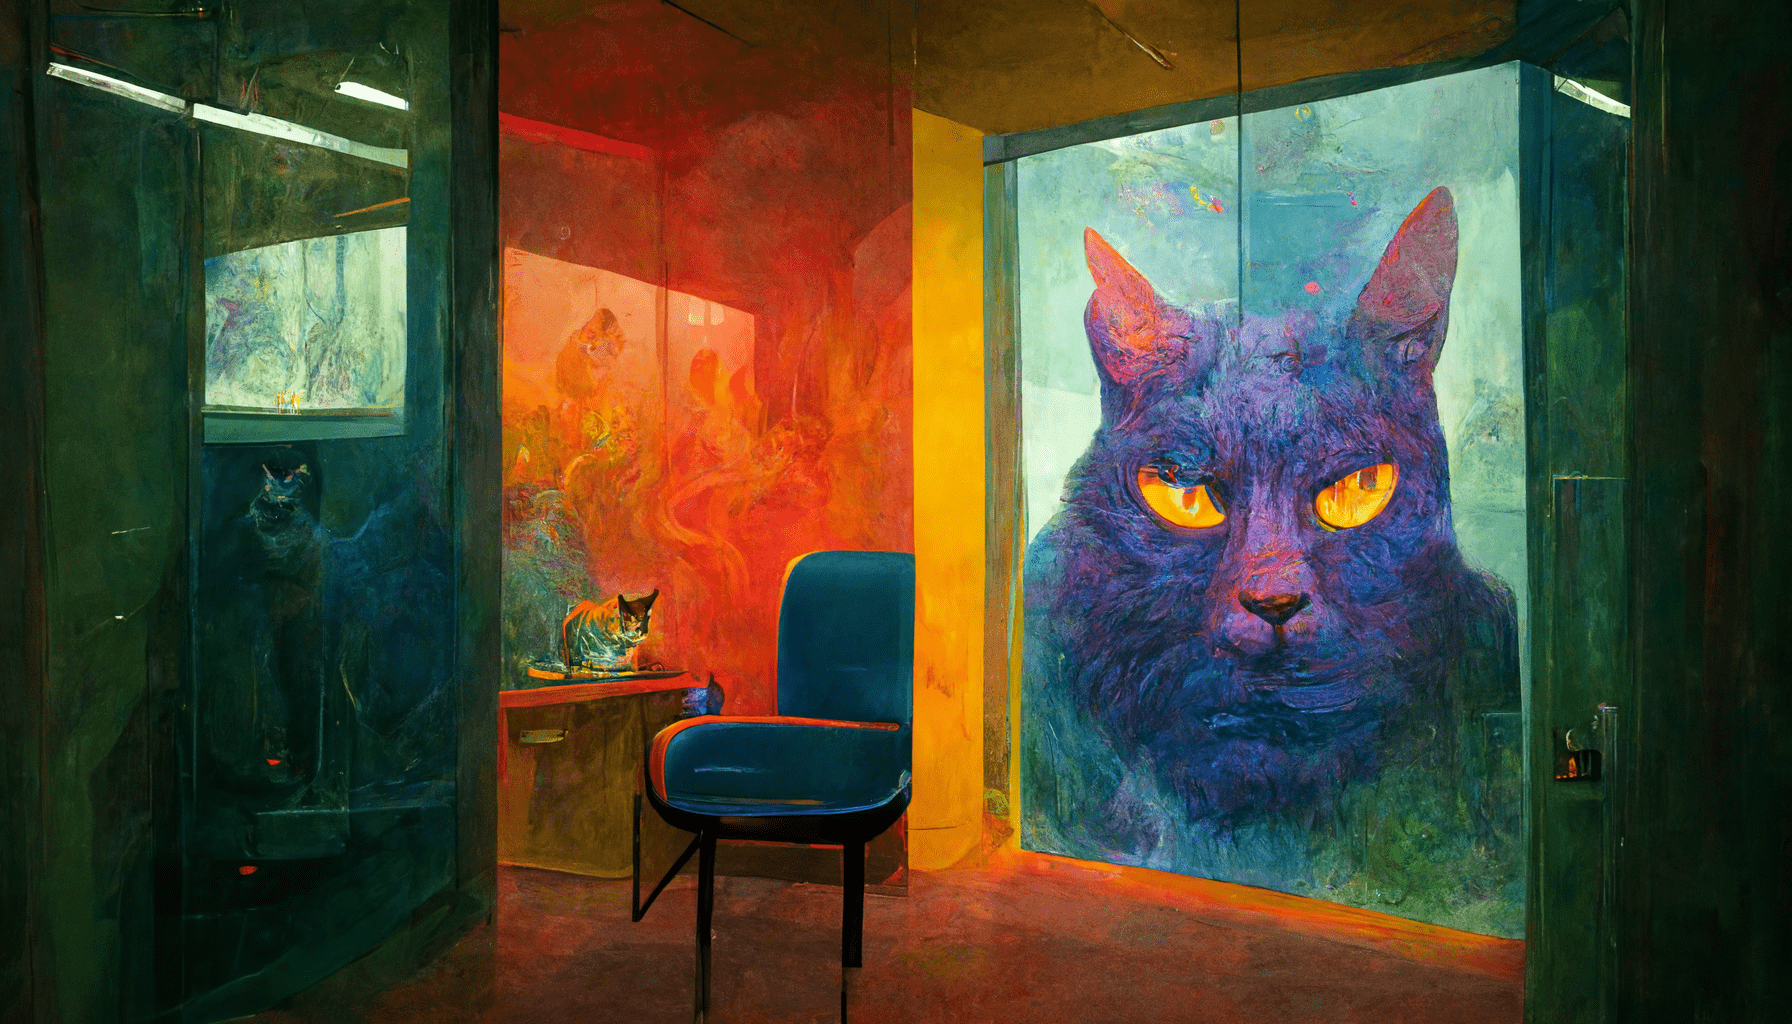 An Impressionistic cat looks down from artwork on a wall.